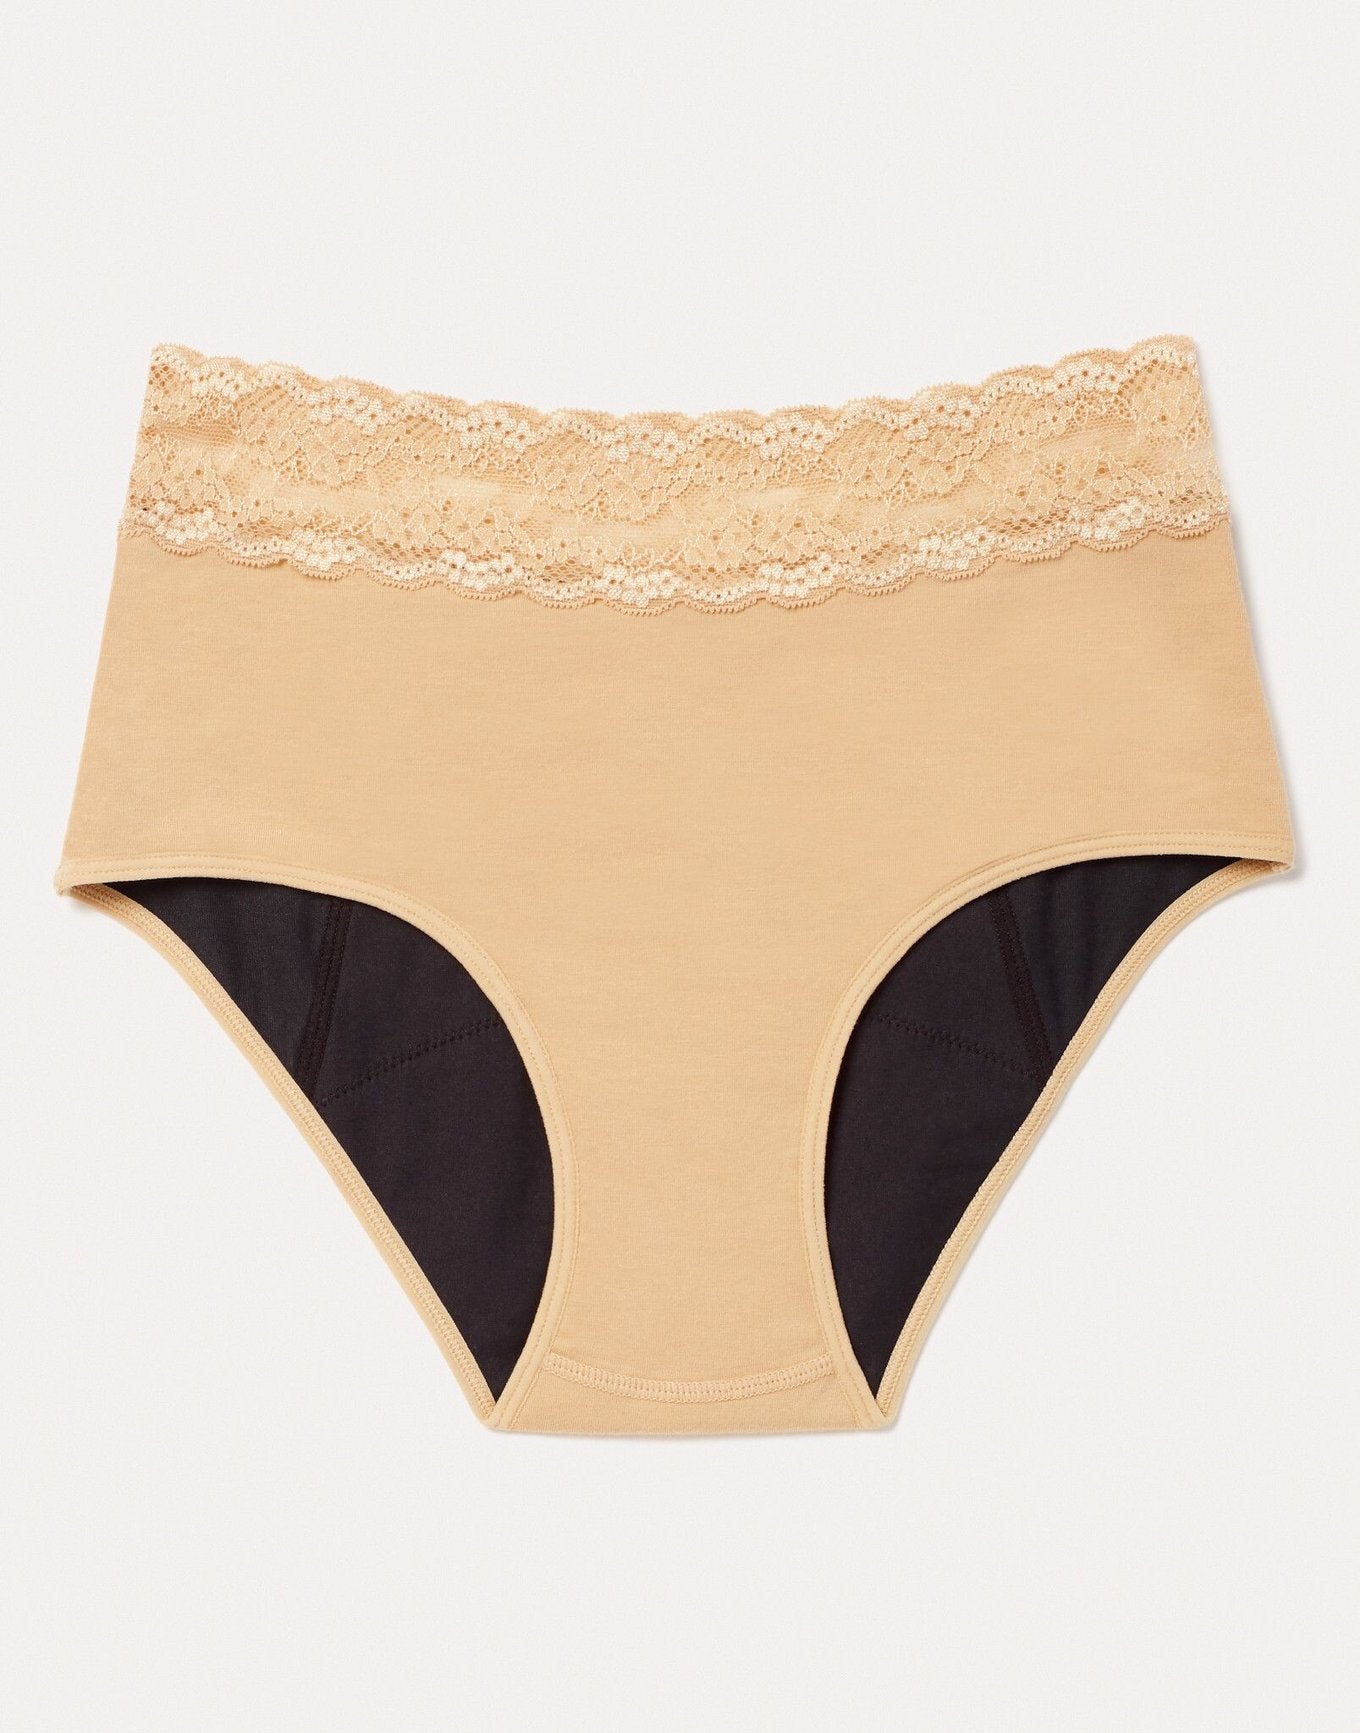 Joyja Ella period-proof panty in color Lucky Fortune Cookie and shape midi brief